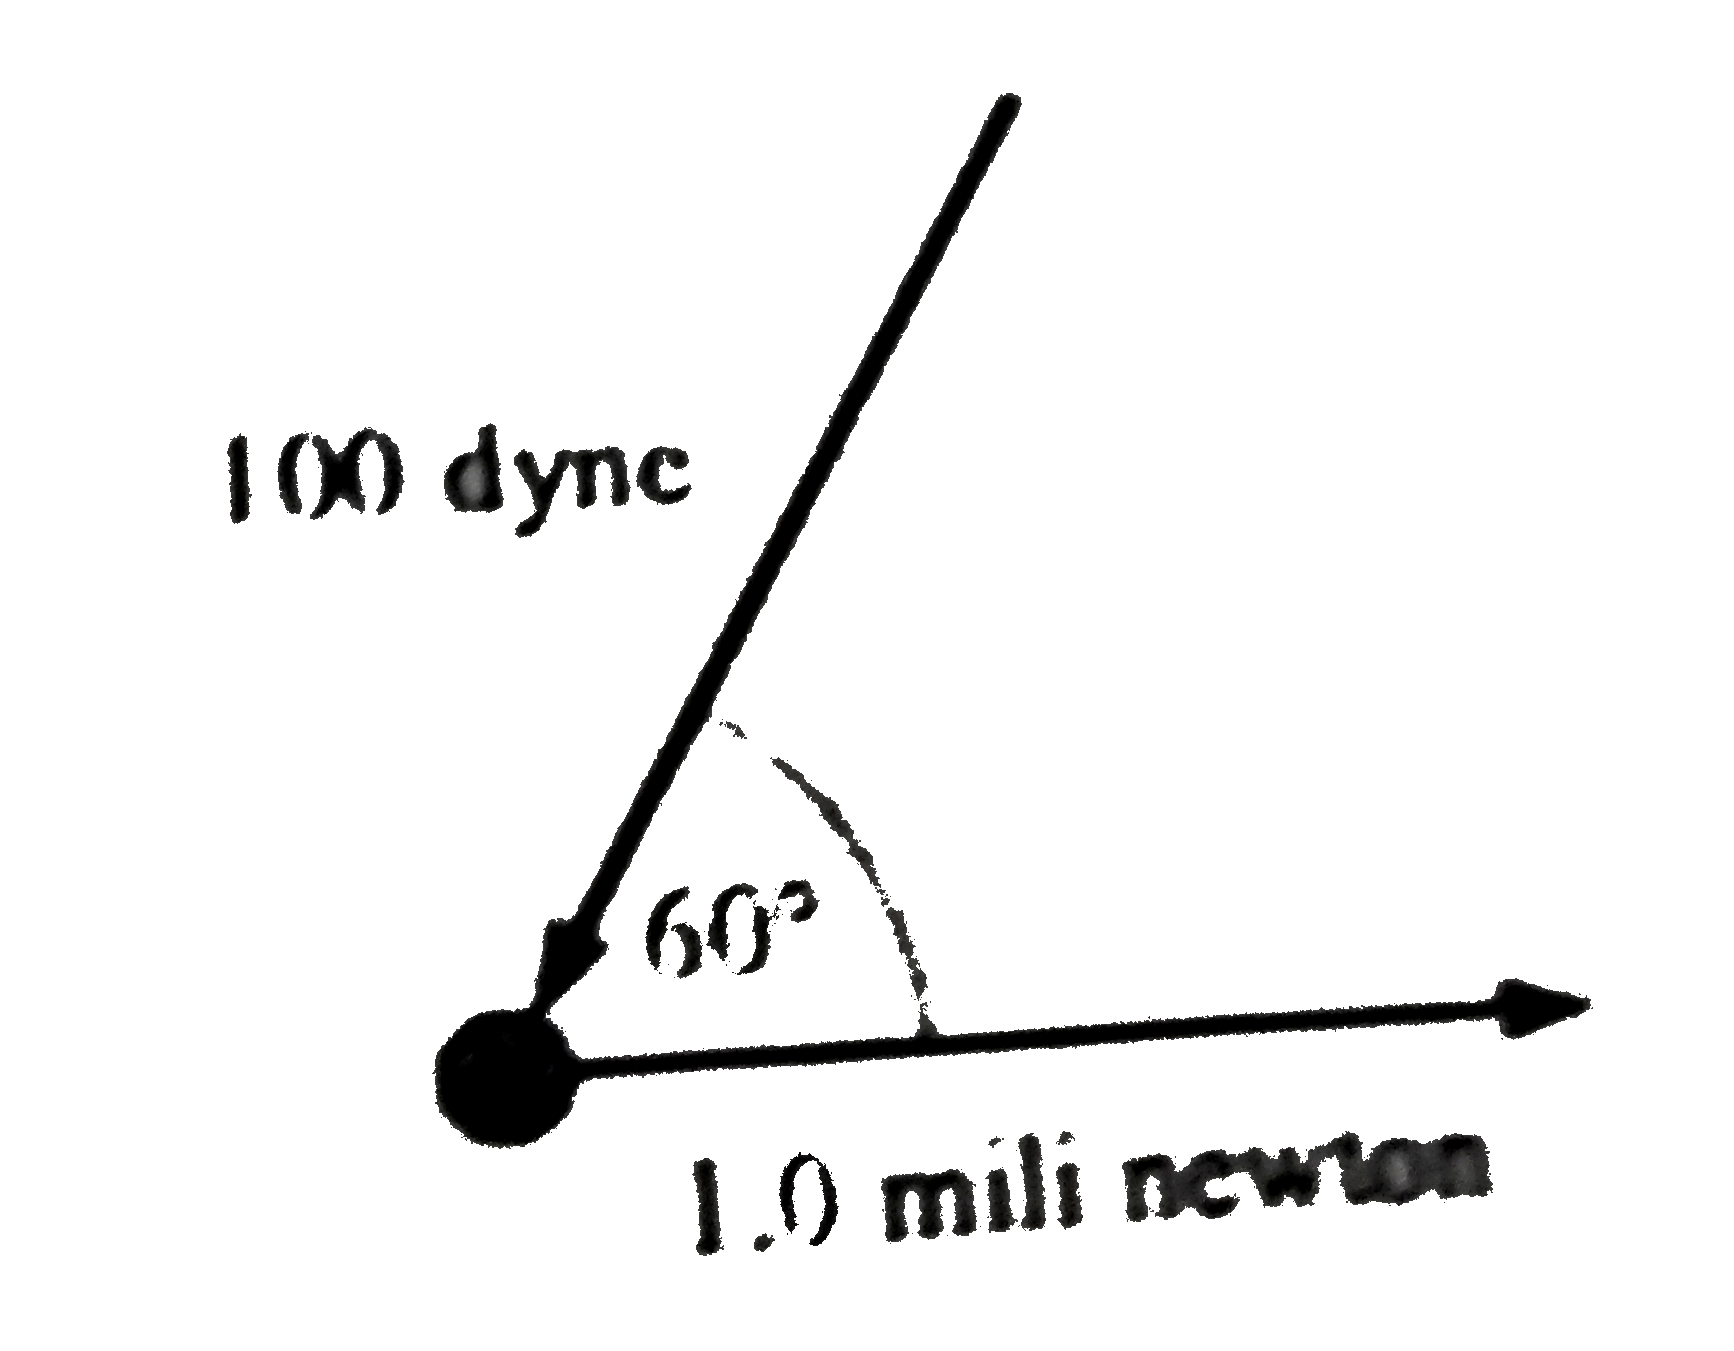 Two forces act on a particle simultaneously as shown in the figure.  Find net force in milli newton on the particle. [Dyne is the CGS unit of forces ]